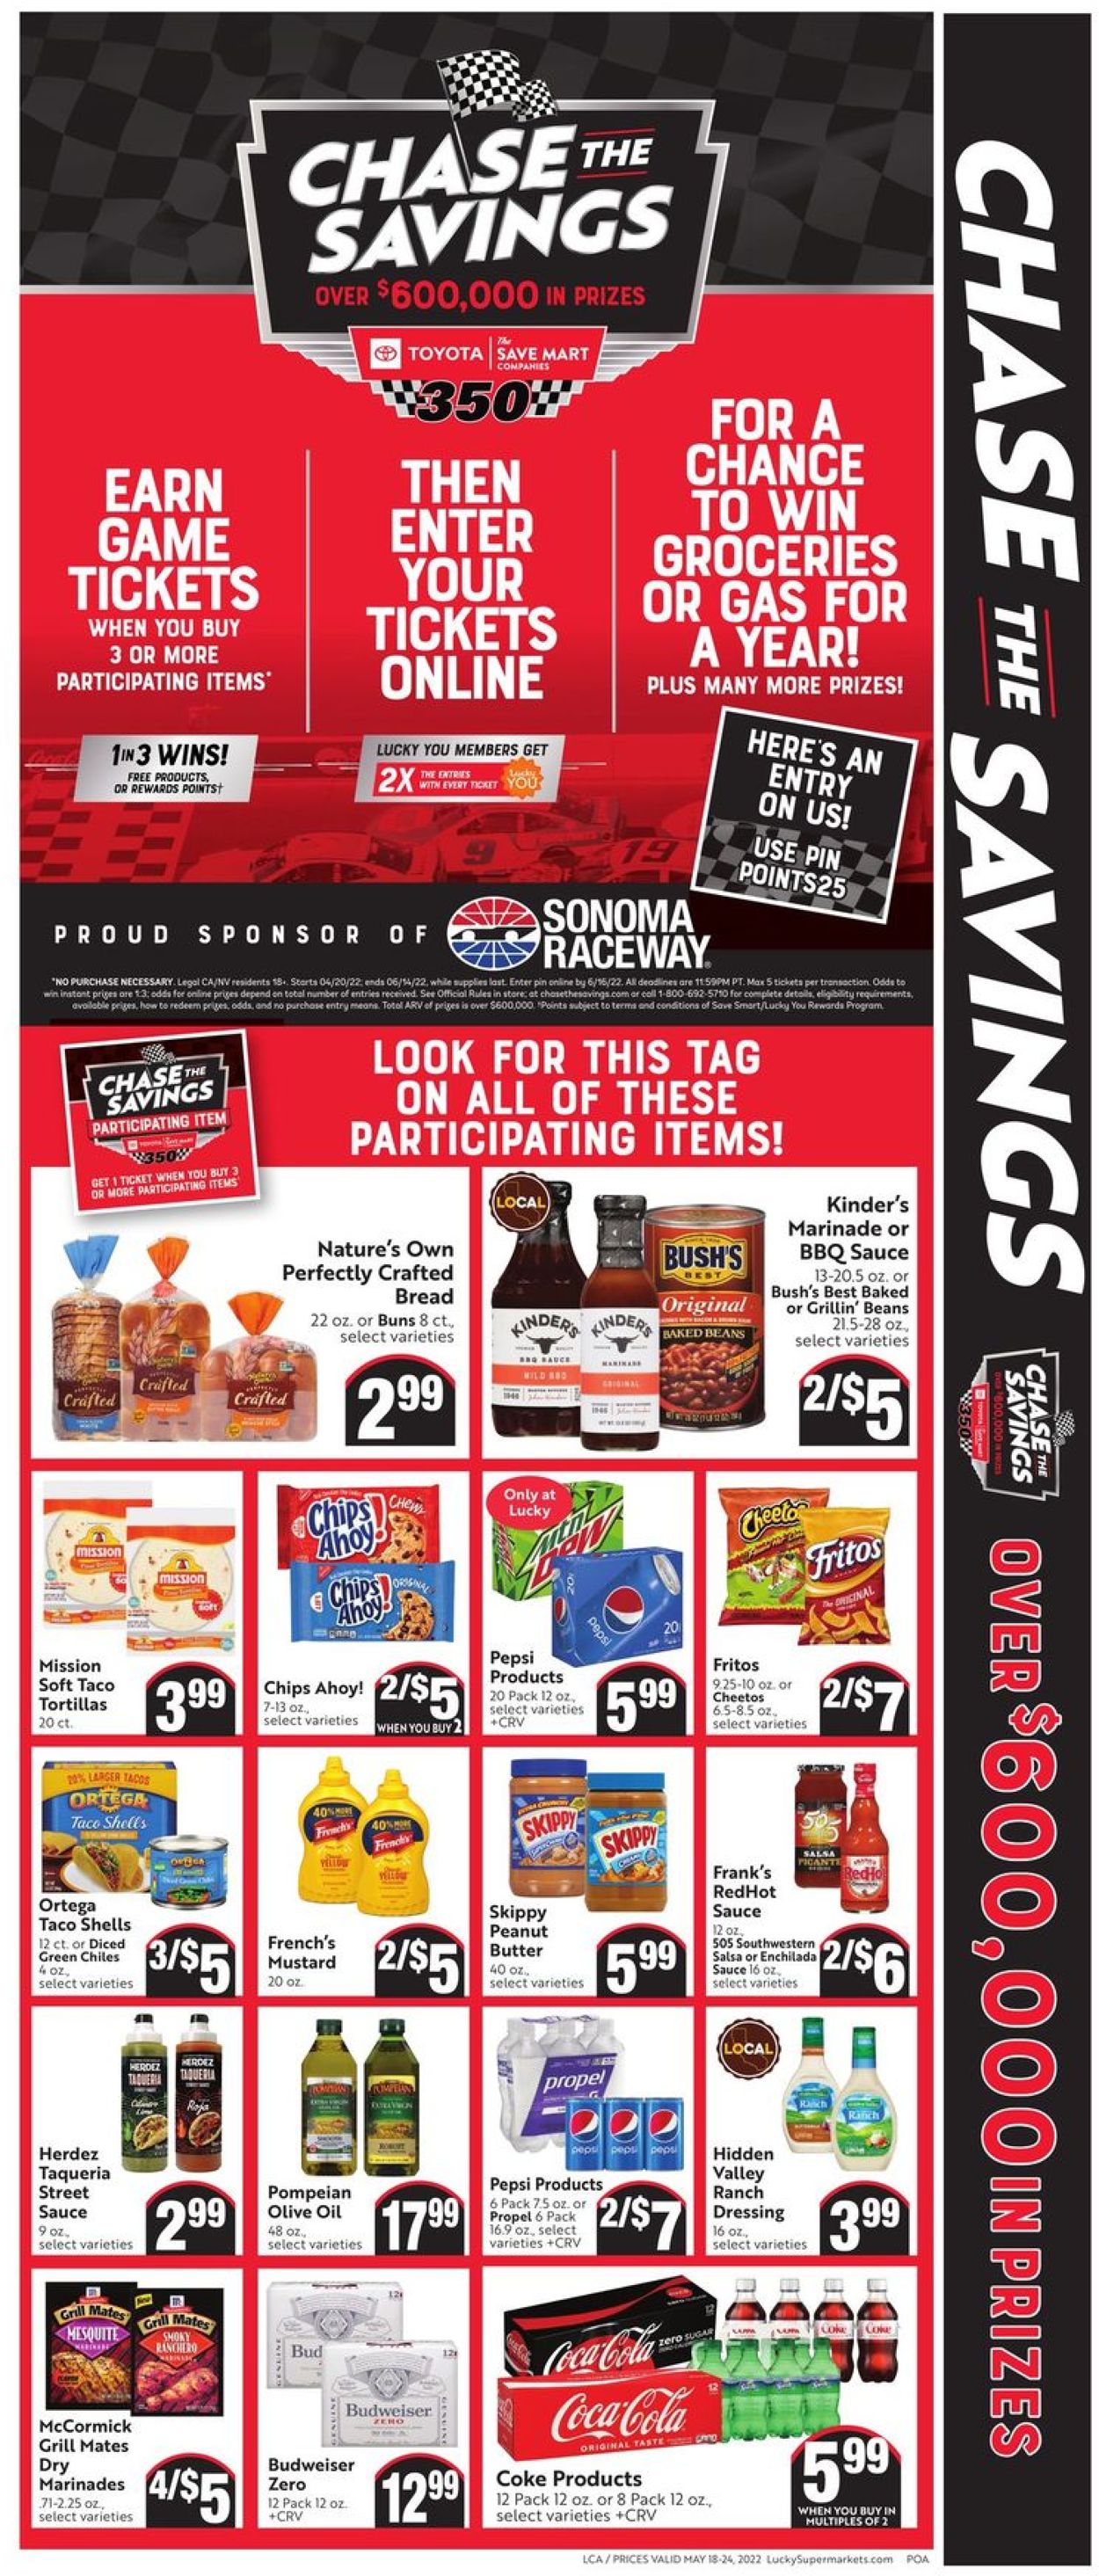 Catalogue Lucky Supermarkets from 05/18/2022